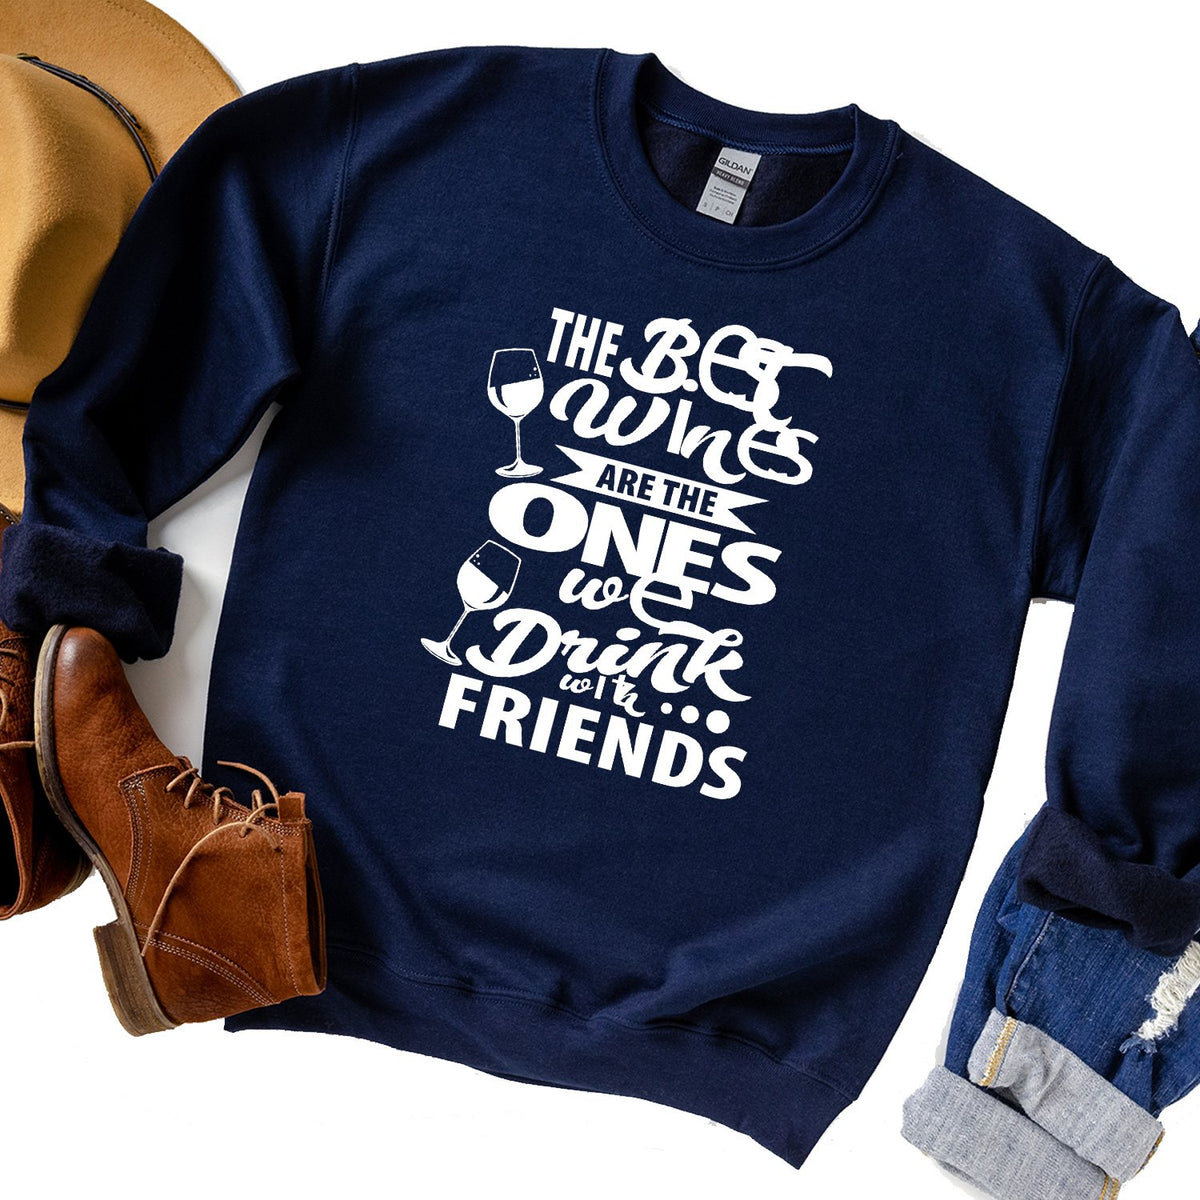 The Best Wines Are The Ones We Drink With Friends - Long Sleeve Heavy Crewneck Sweatshirt